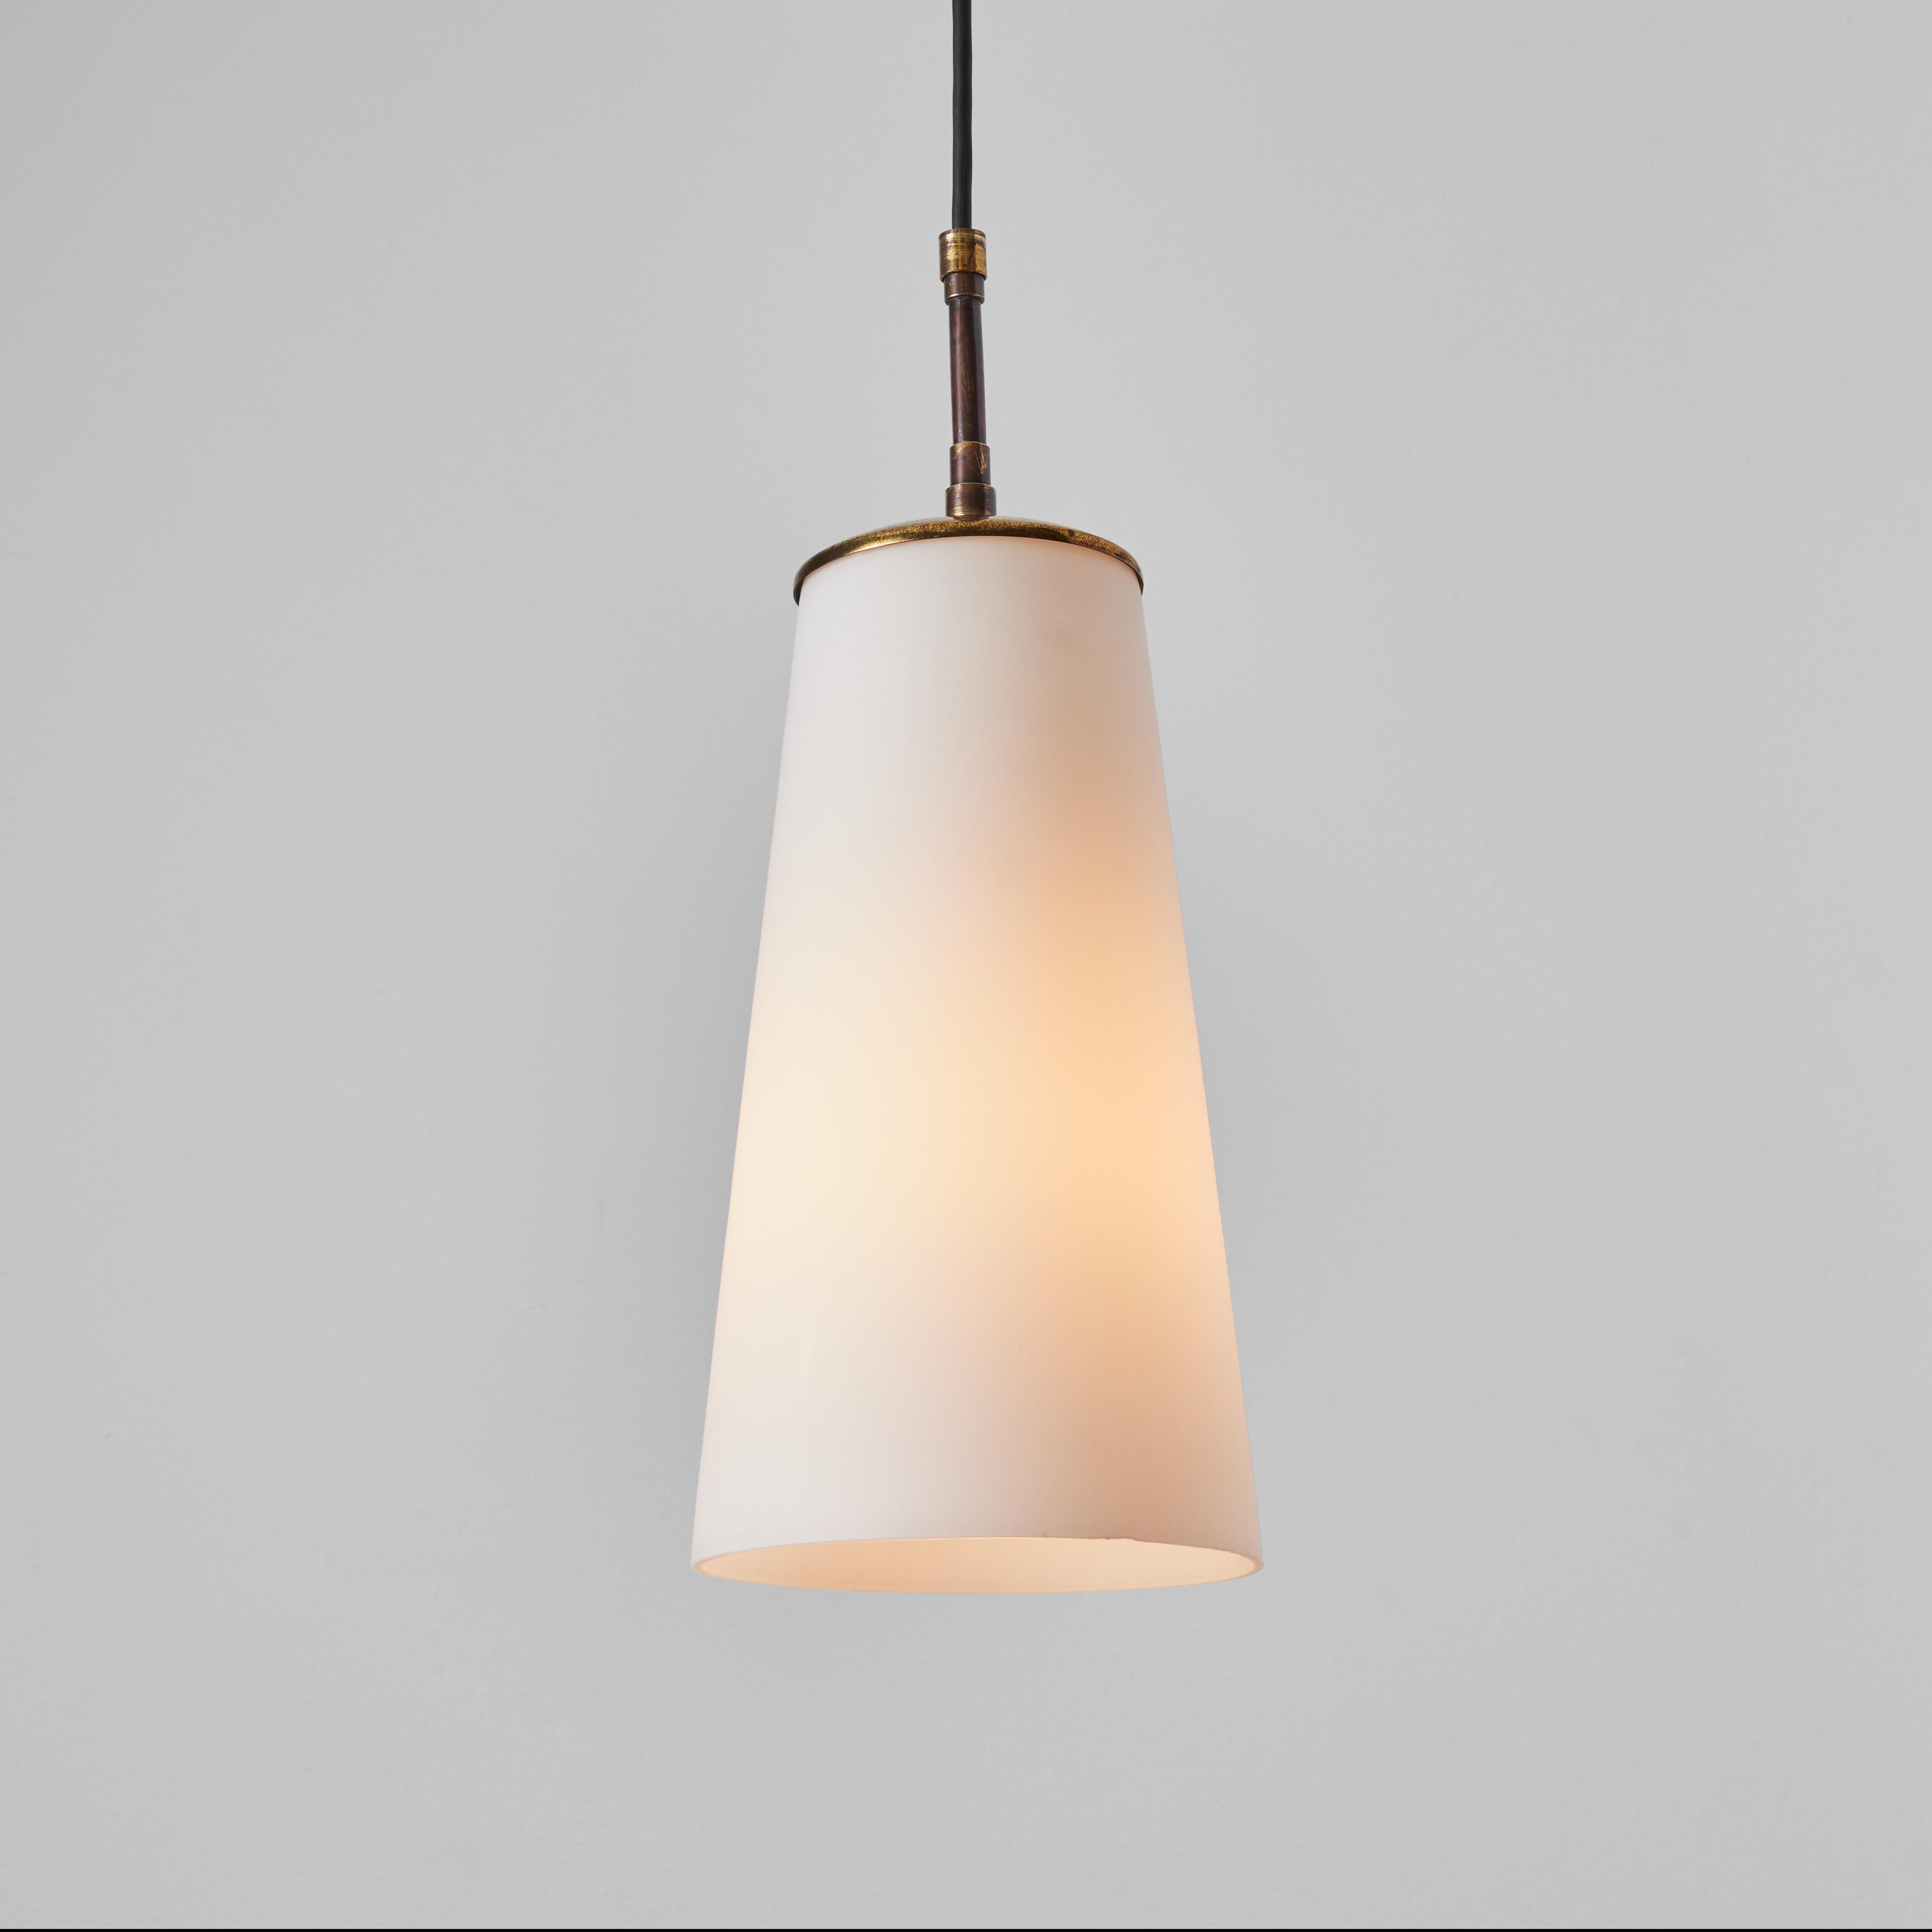 1950s brass and Opaline glass pendant lamp attributed to Stilnovo. Executed in geometric opaline glass with brass hardware and canopy. An incomparably clean and refined design characteristic of midcentury Italian lighting at its highest level.